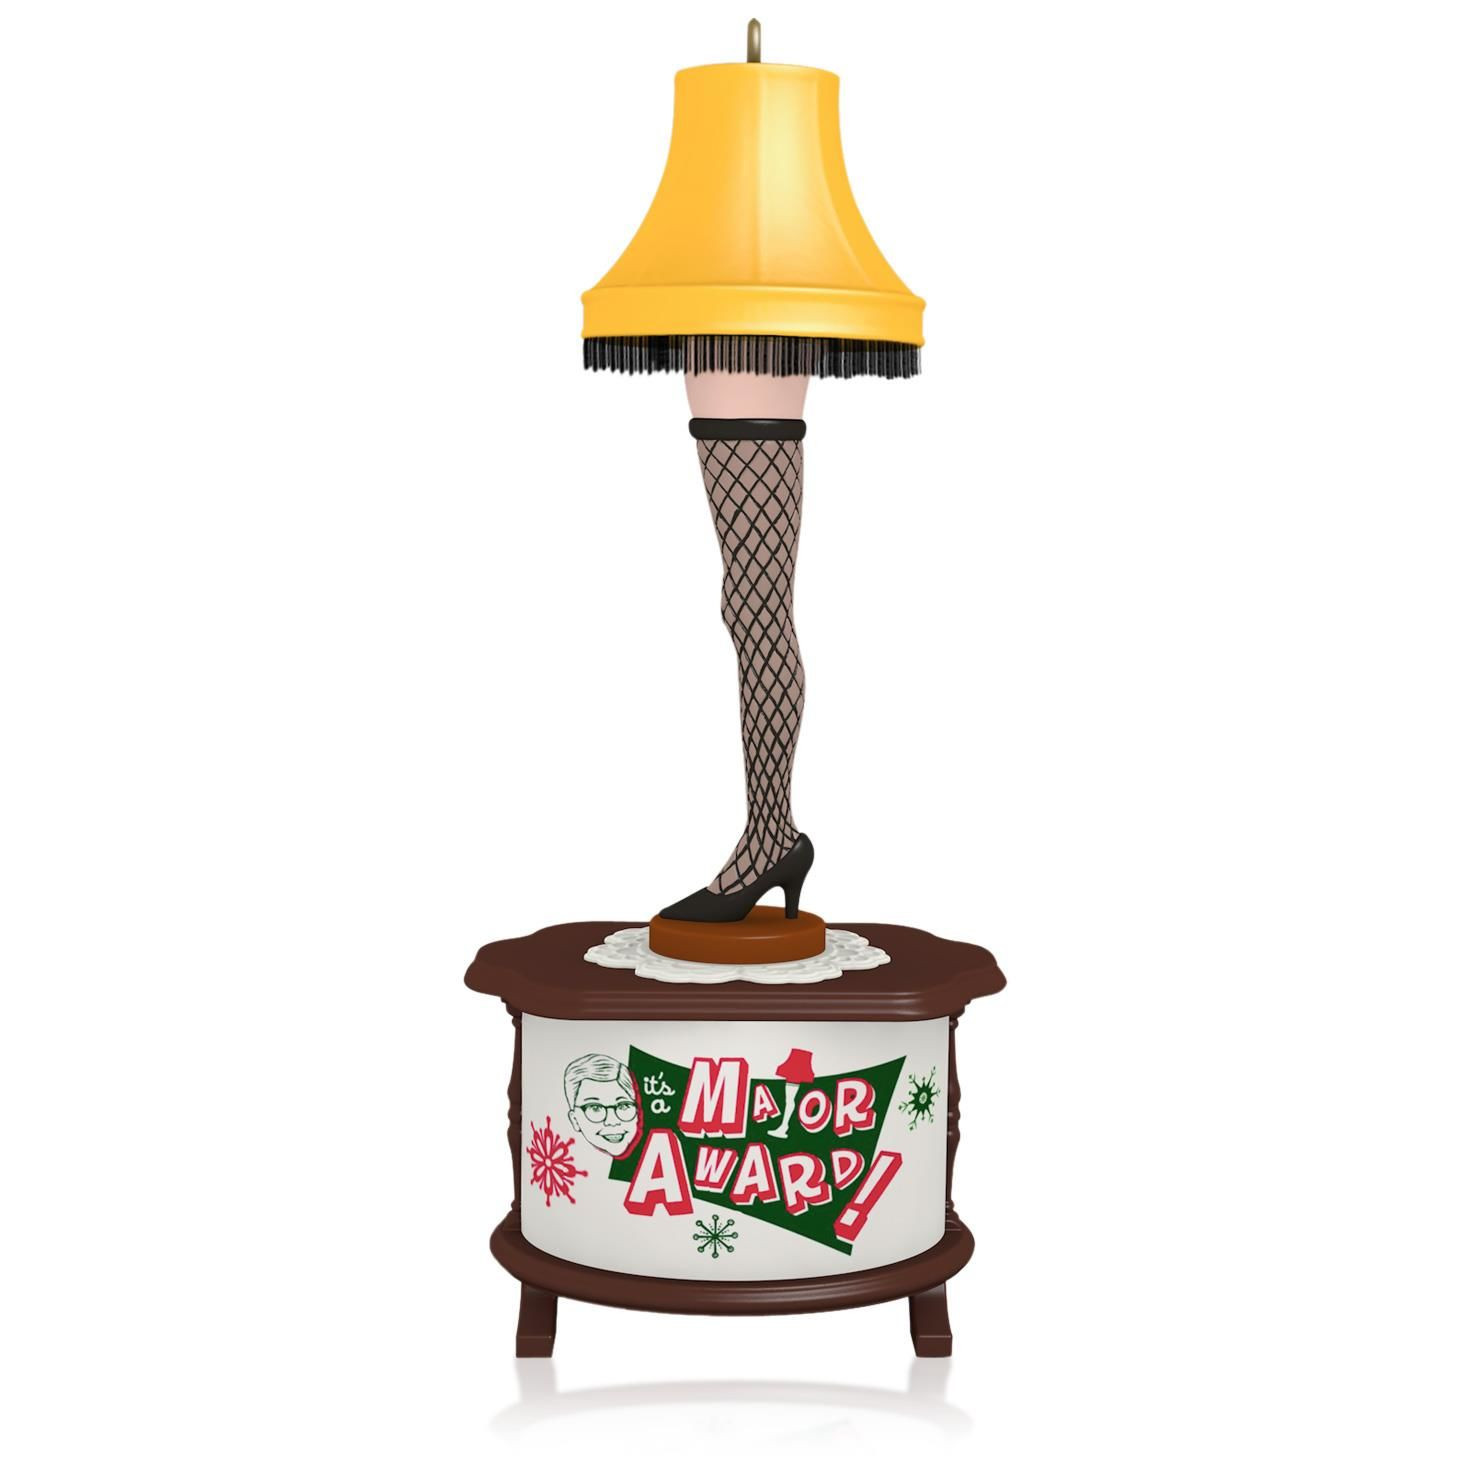 Christmas Story Leg Lamp Ornament
 Megatron Beetlejuice And More In The 2015 Hallmark